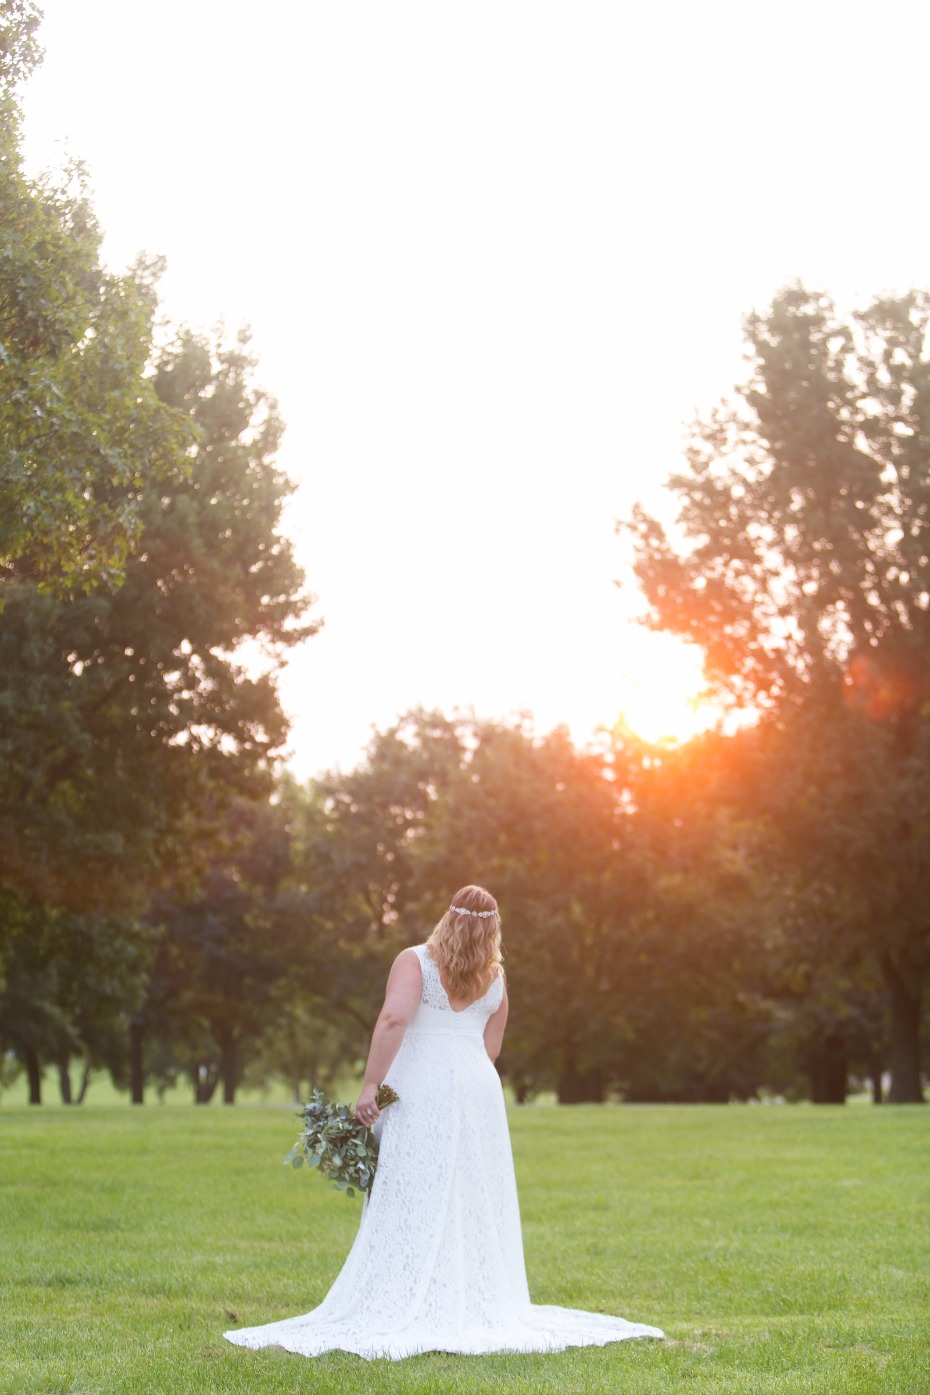 sunrise bridal session that we cannot get enough of